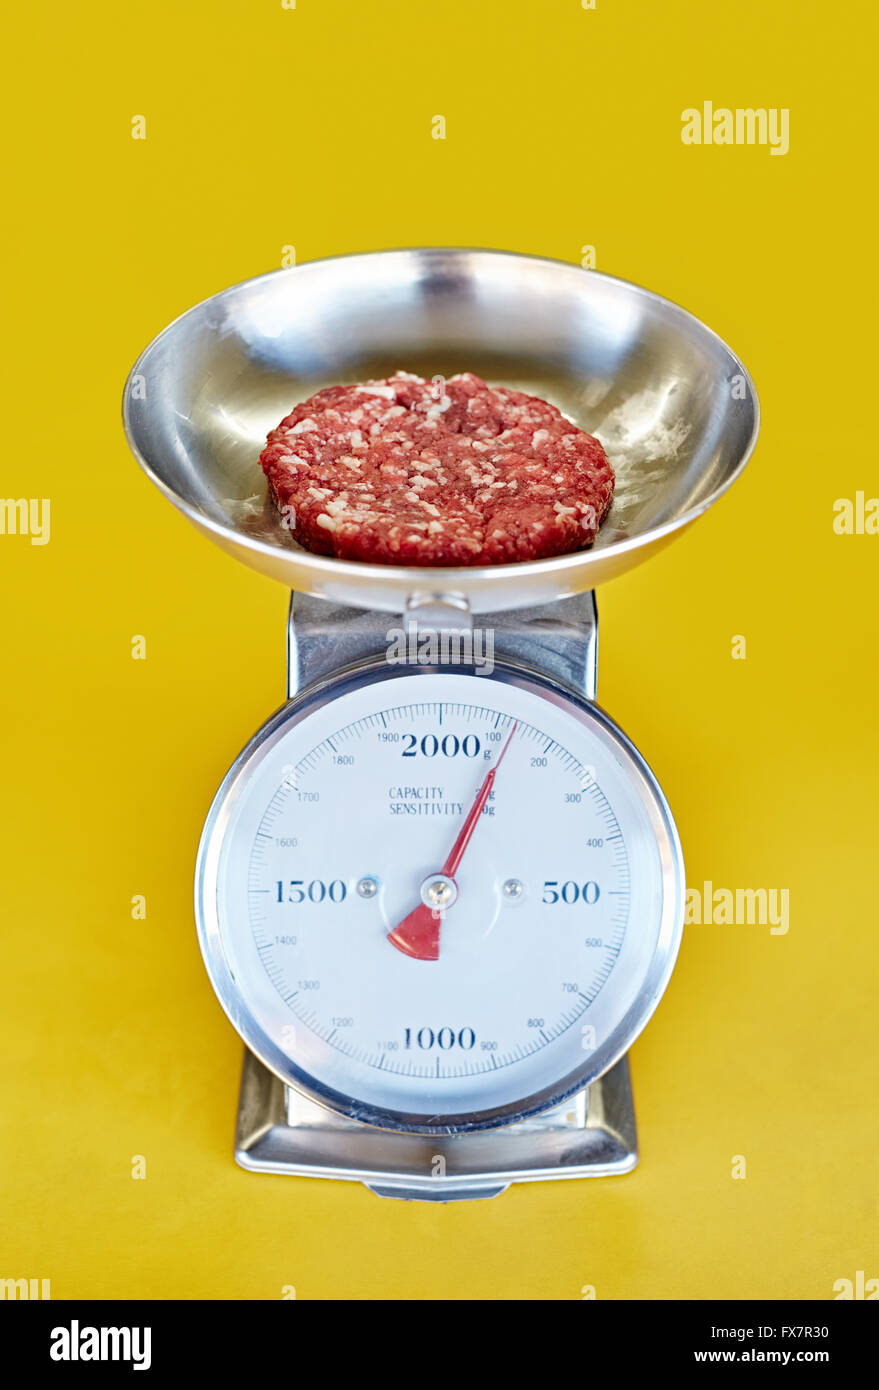 https://c8.alamy.com/comp/FX7R30/retro-kitchen-scale-with-fresh-minced-red-meat-being-weighed-FX7R30.jpg